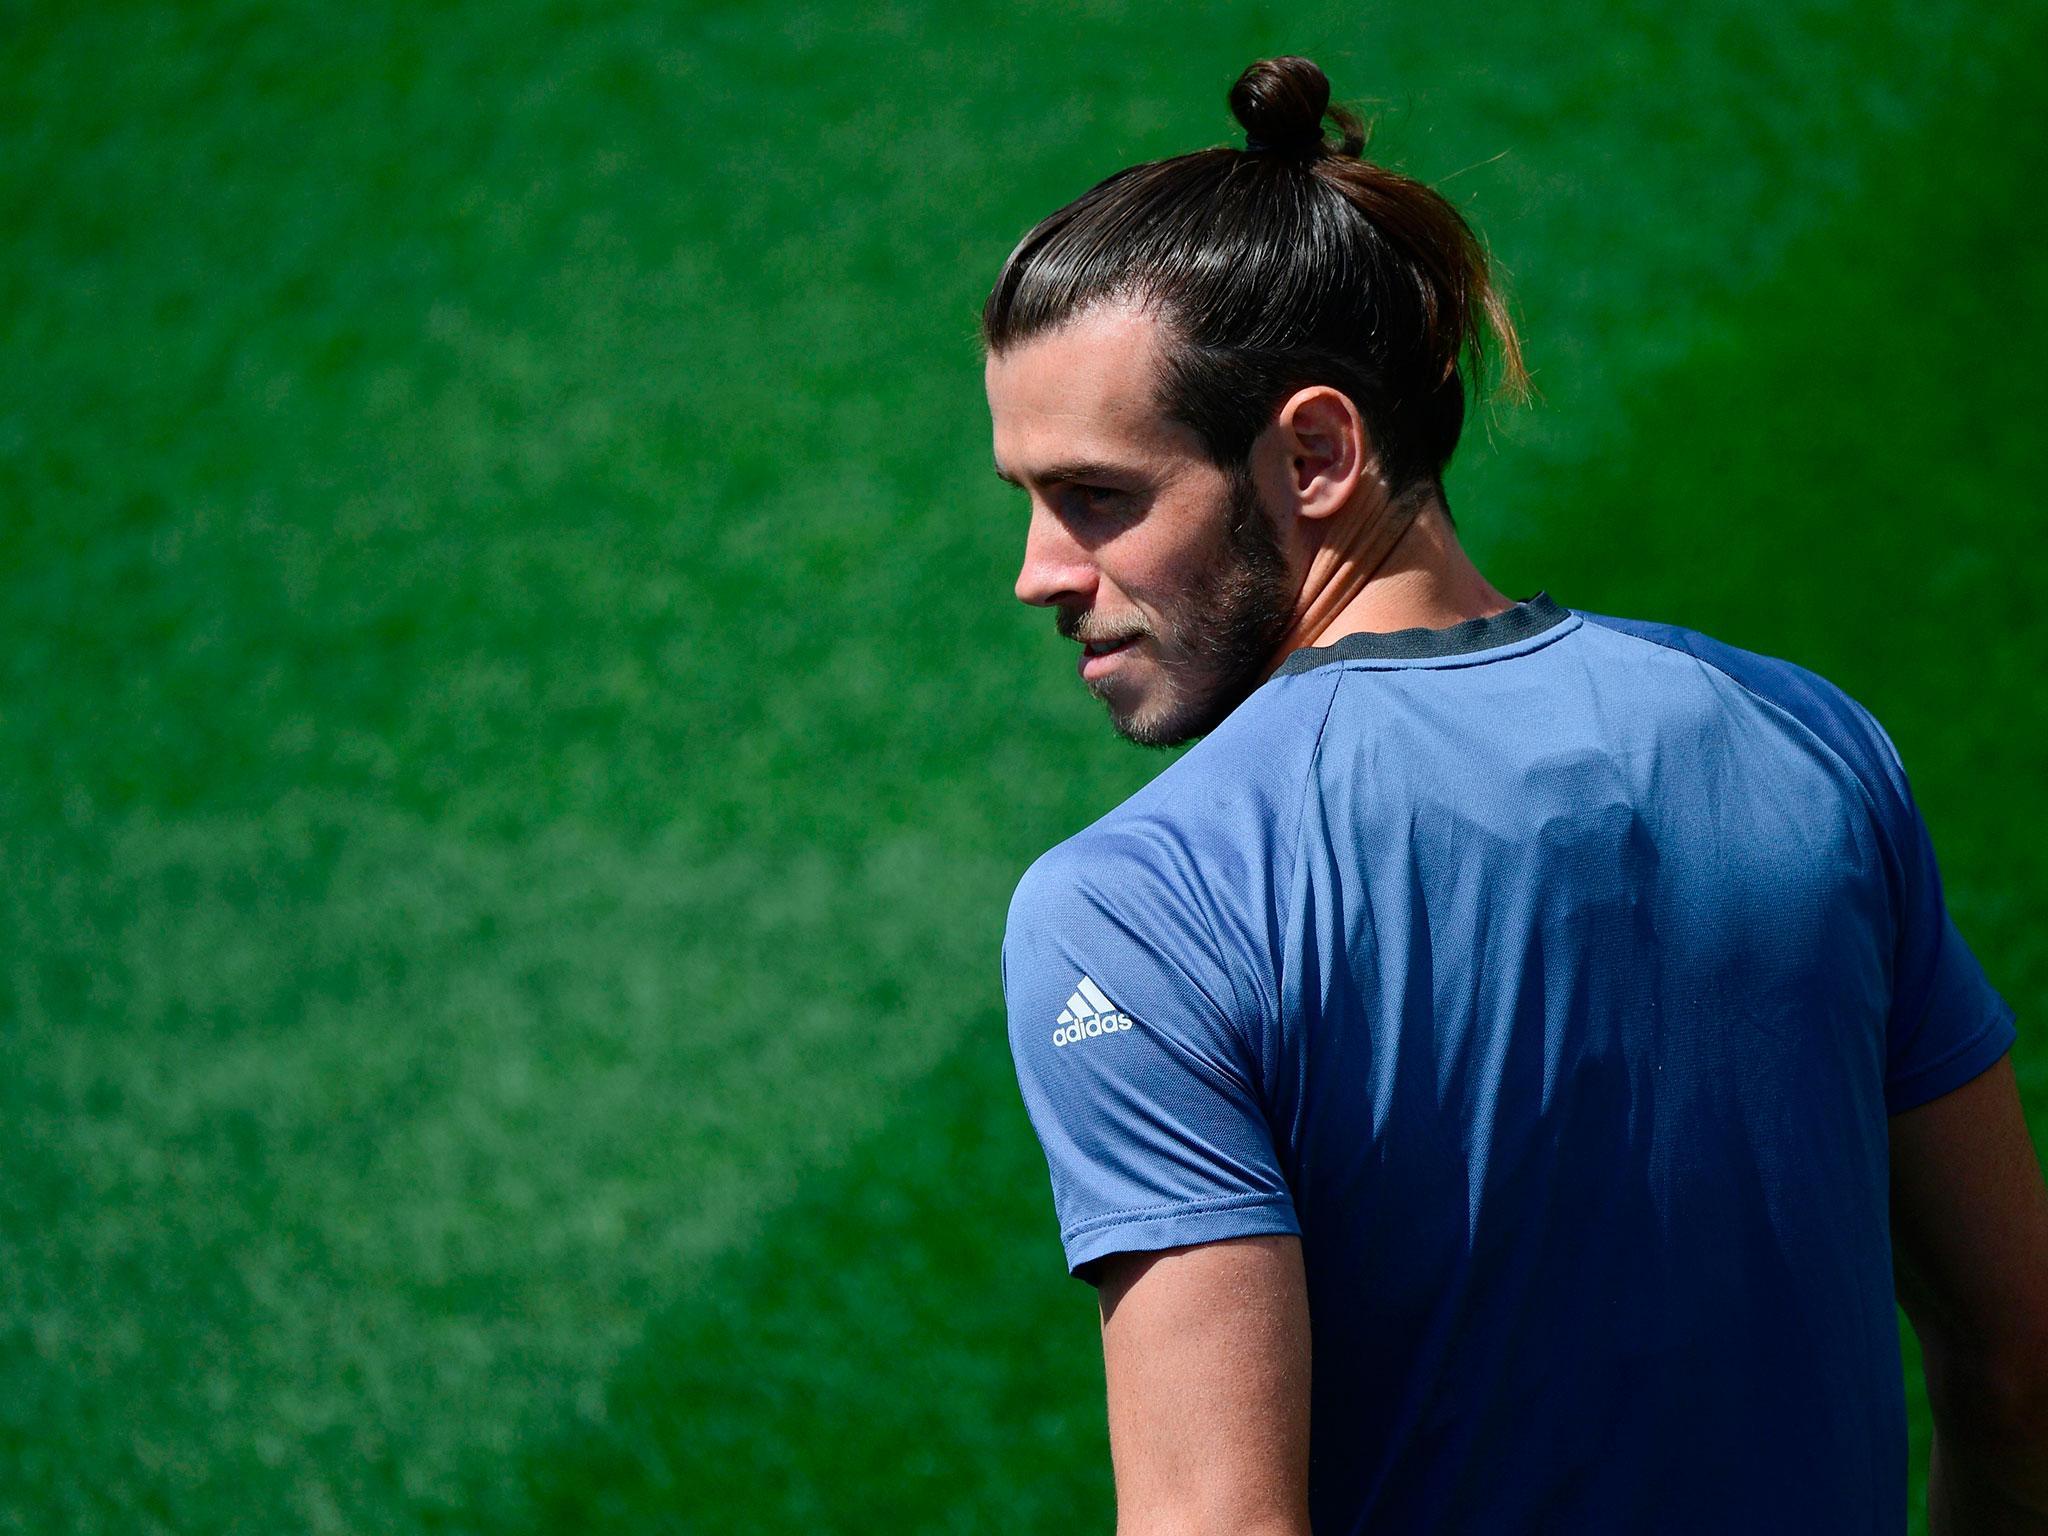 Gareth Bale has been linked with a move to Manchester United